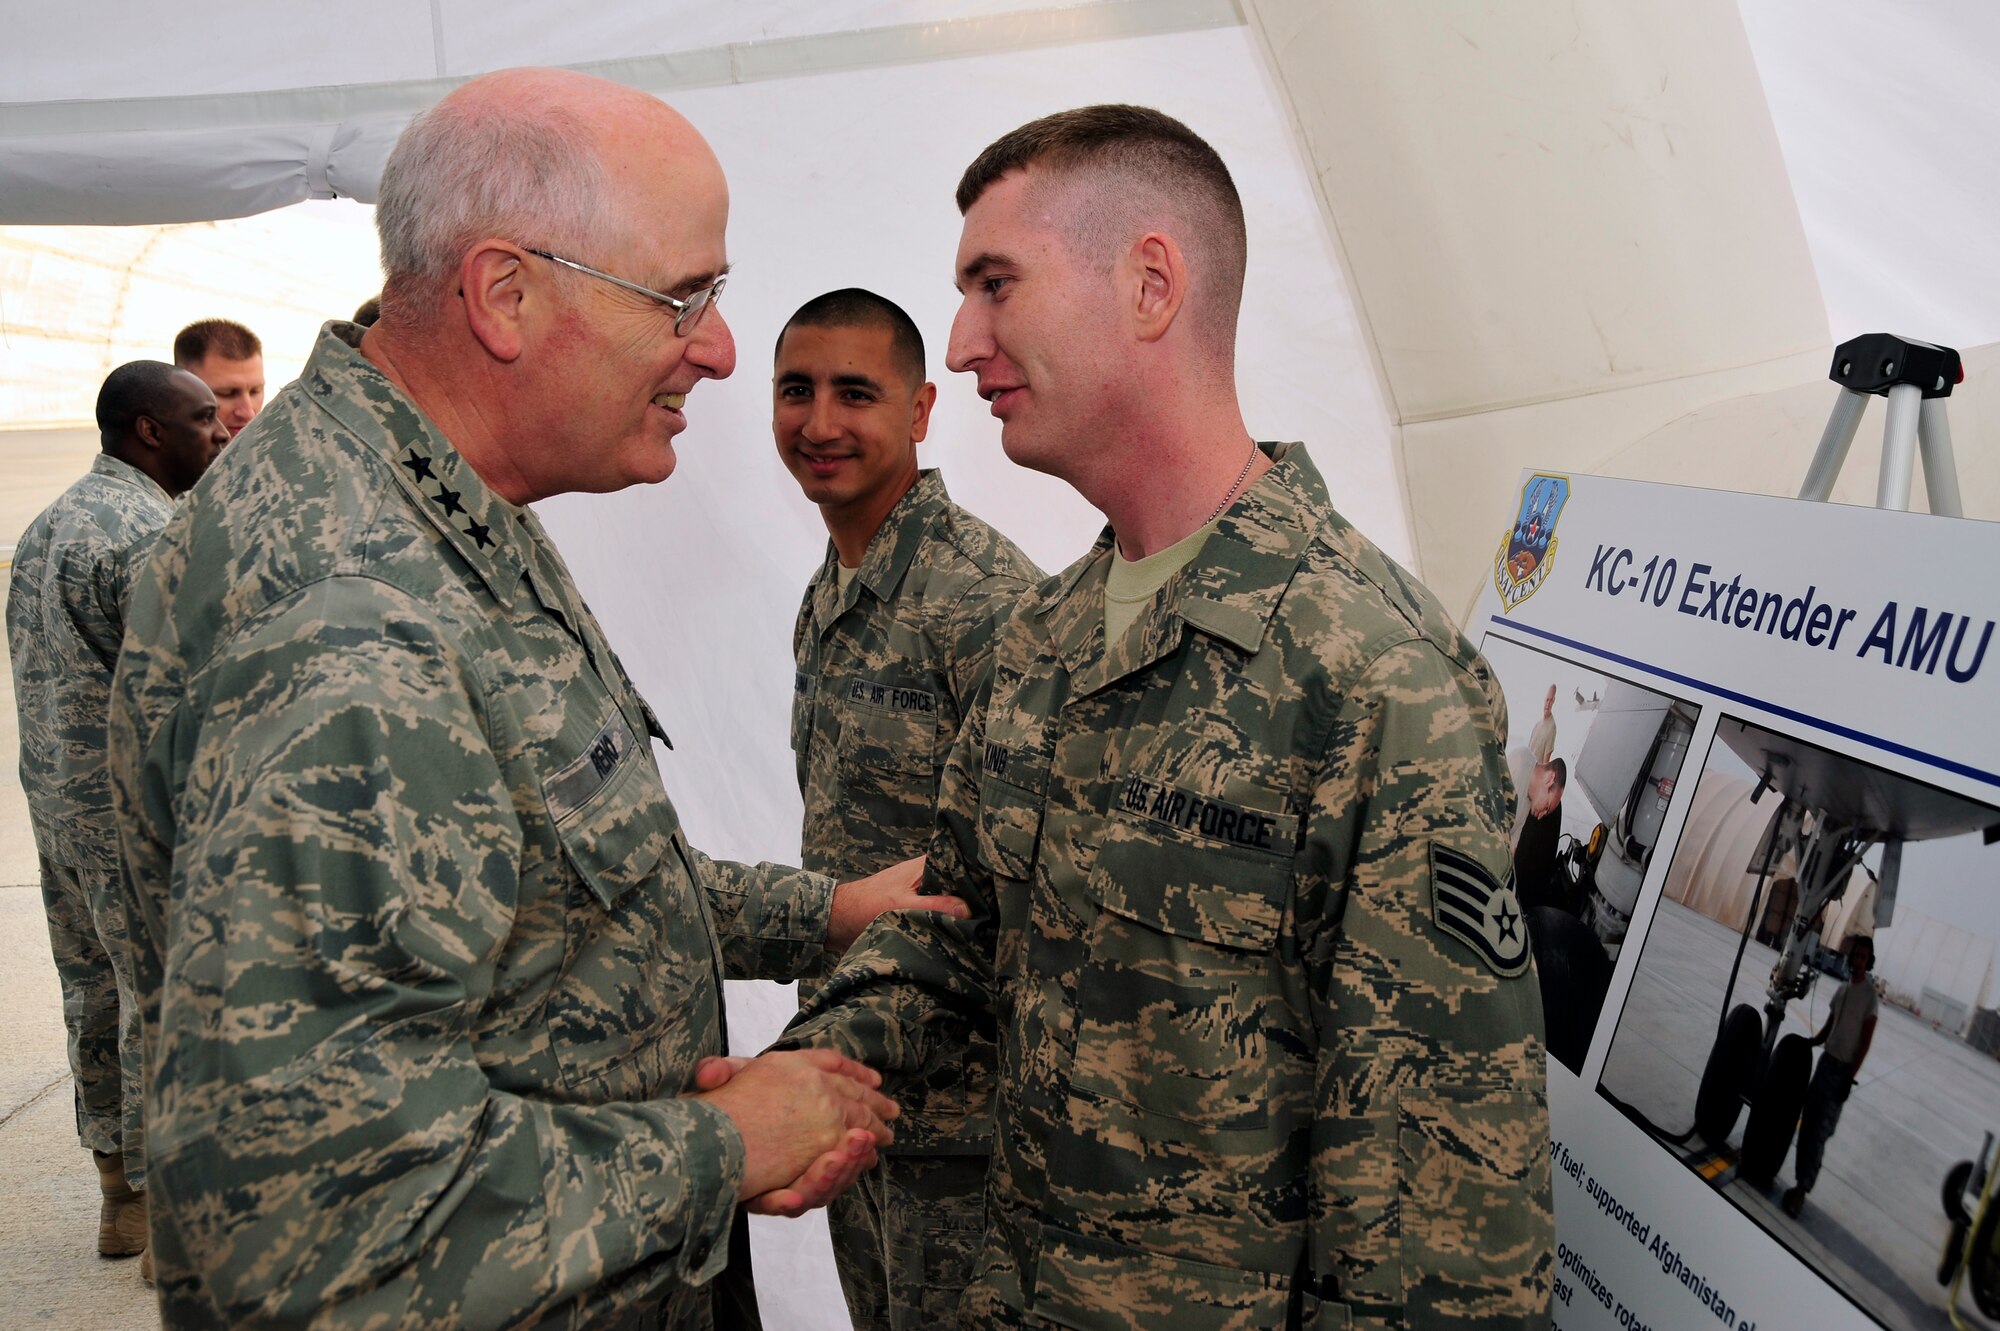 SOUTHWEST ASIA - Lt. Gen. Loren Reno, Deputy Chief of Staff for Logistics, Installations and Mission Support, presents a coin to Staff Sgt. Odis King and Airman 1st Class Daniel Deluna, 380th Expeditionary Aircraft Maintenance Squadron, as a token of gratitude for the briefing given Dec. 10, 2009. Sergeant King and Airman Deluna are deployed from McGuire Air Force Base, N.J., Sergeant King grew up in Mitchell, Ind., and Airman Deluna grew up in San Antonio, Texas. (U.S. Air Force photo/Tech. Sgt. Charles Larkin Sr)